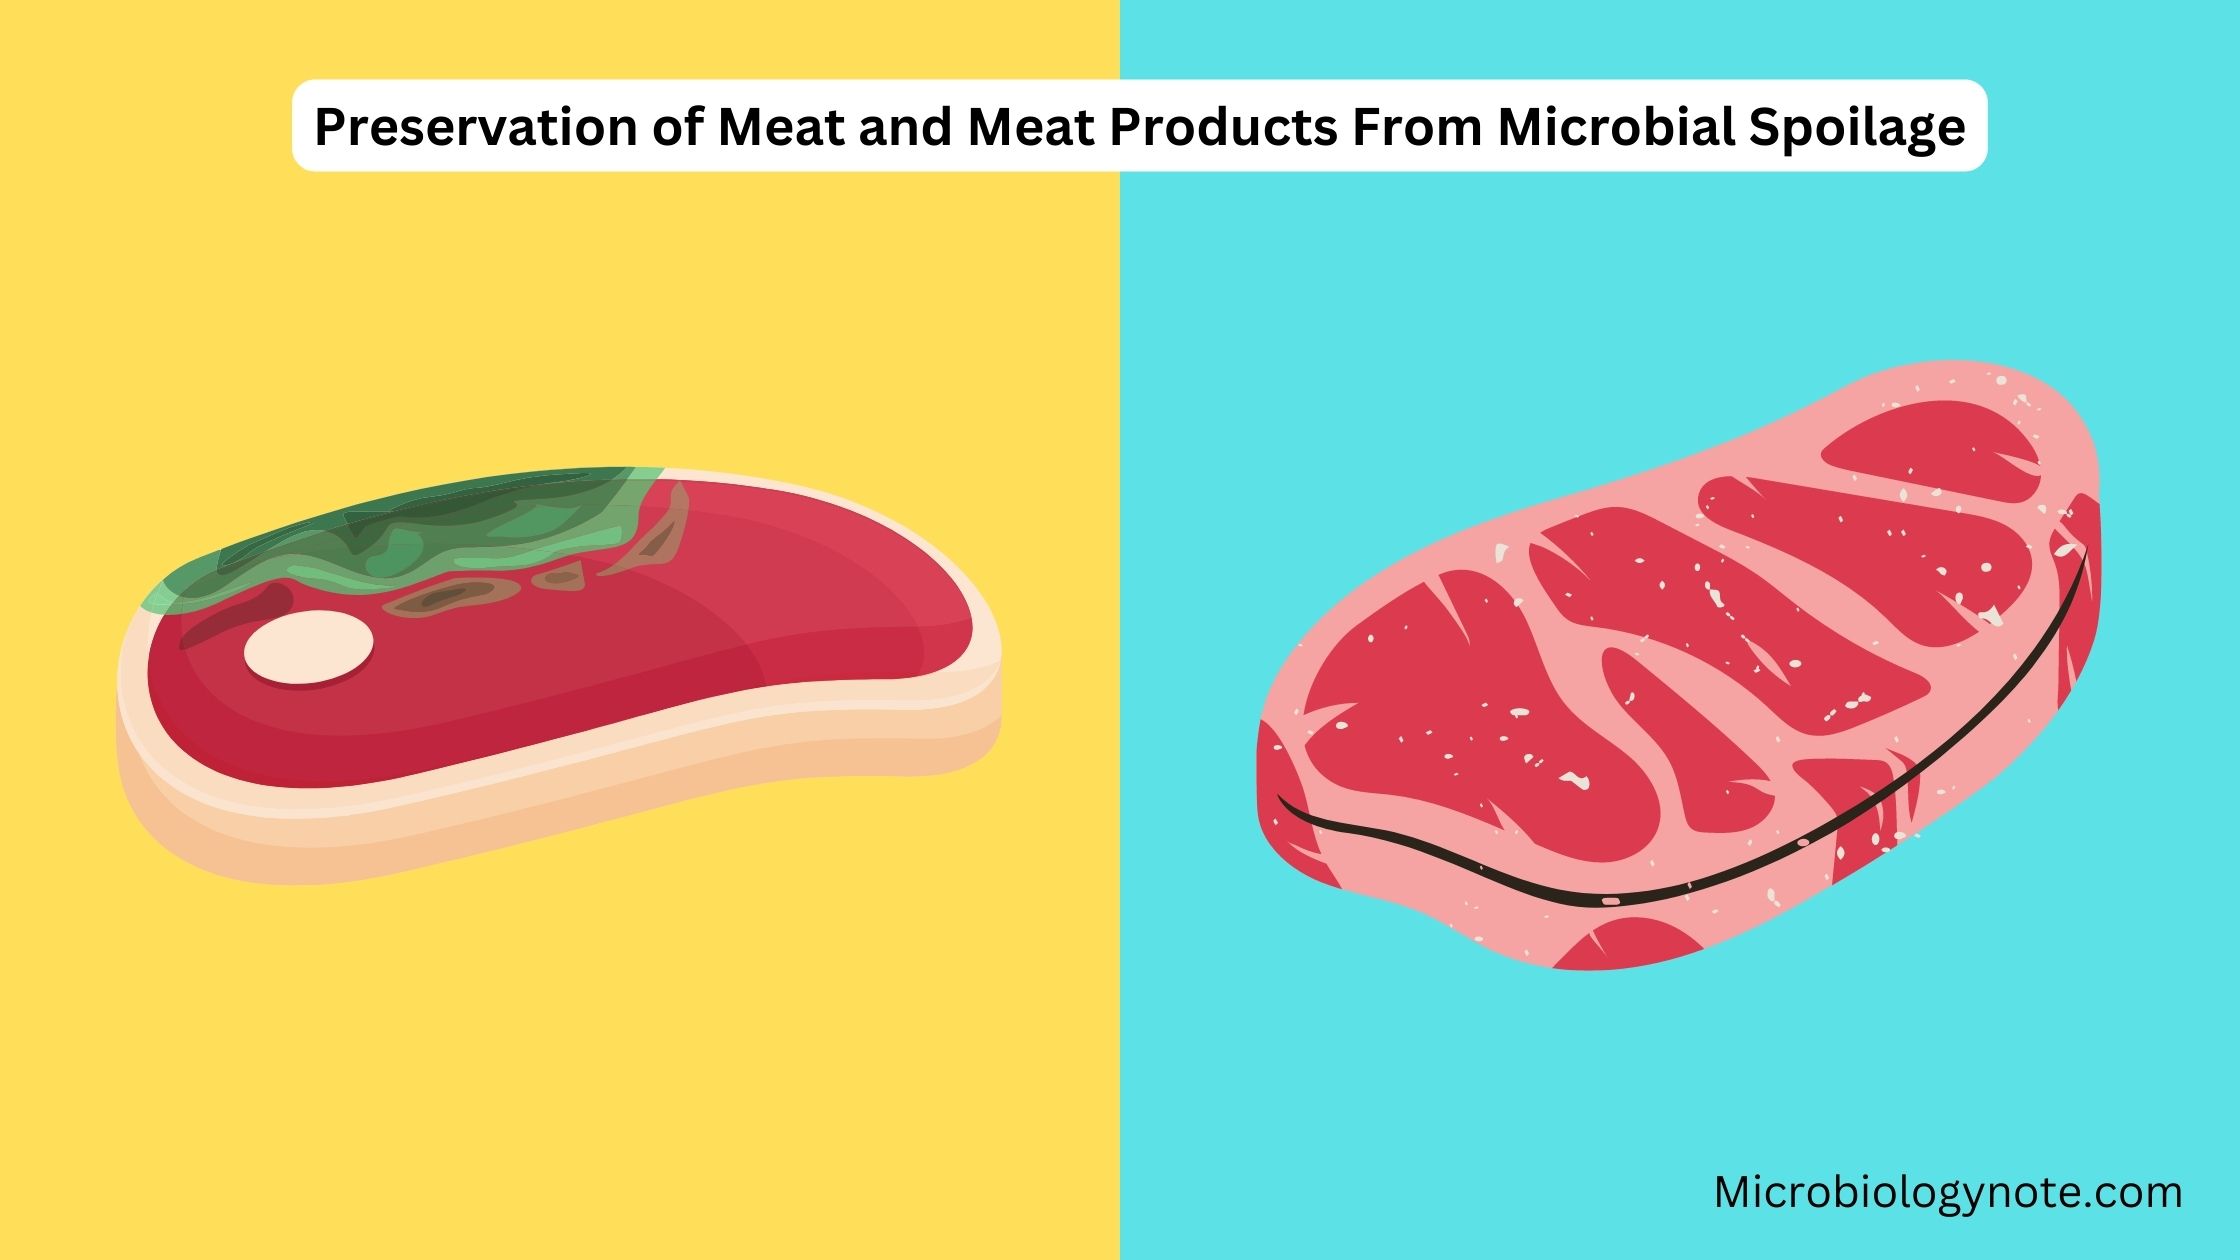 Preservation of Meat and Meat Products From Microbial Spoilage